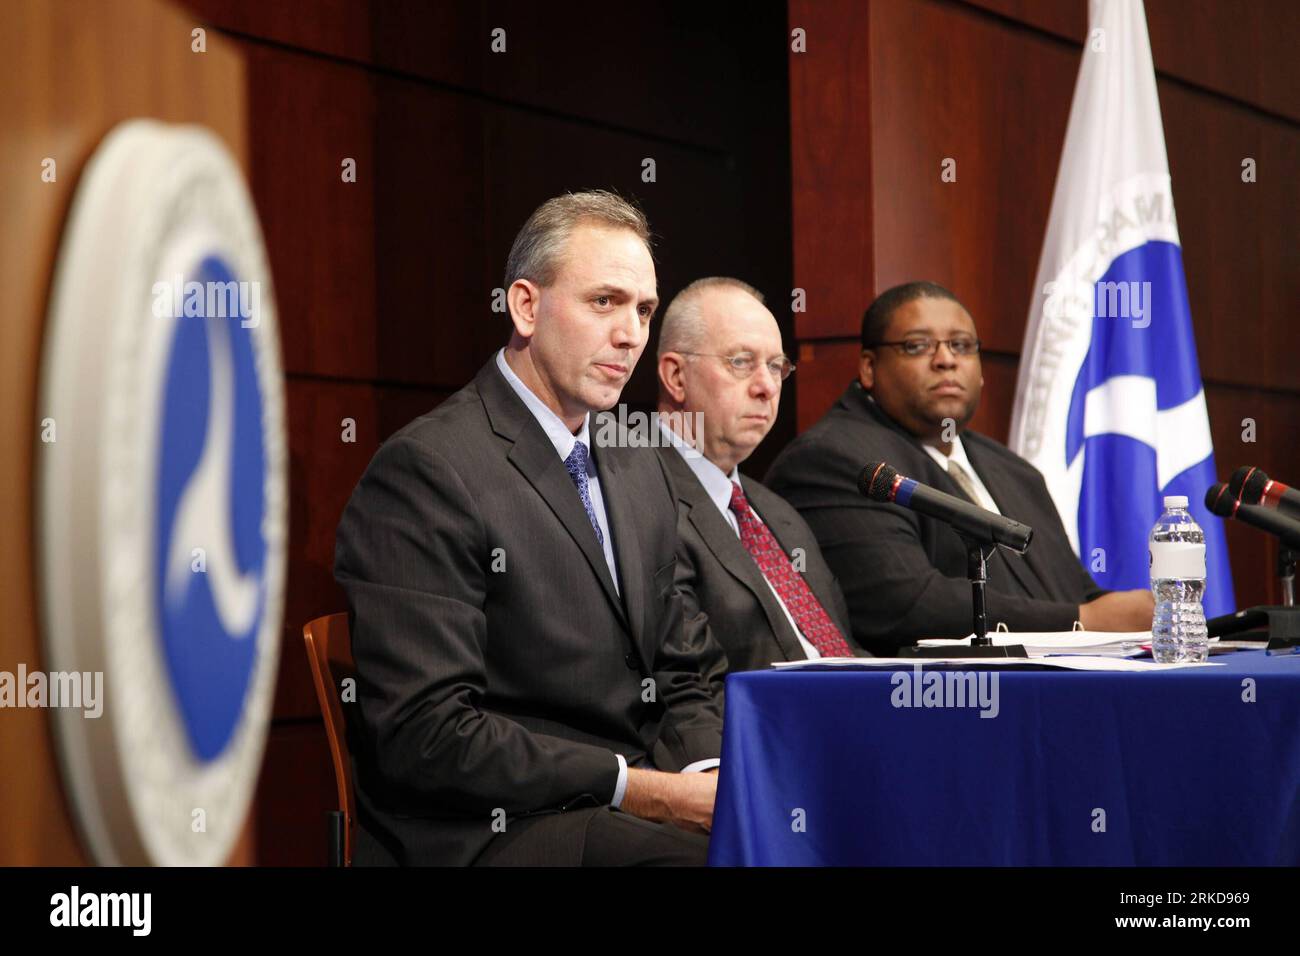 Bildnummer: 54889644  Datum: 08.02.2011  Copyright: imago/Xinhua (110208) -- WASHINGTON, Feb. 8, 2011 (Xinhua) -- (L to R) NASA Principal Engineer Michael Kirsch, National Highway Traffic Safety Administration (NHTSA) Deputy Administrator Ron Medford, and NHTSA Administrator David Strickland attend a press conference in Washington D.C., the United States, Feb. 8, 2011. NASA engineers found no electronic flaws in Toyota vehicles capable of producing the large throttle openings required to create dangerous high-speed unintended acceleration incidents, showed a ten-month study released on Tuesday Stock Photo